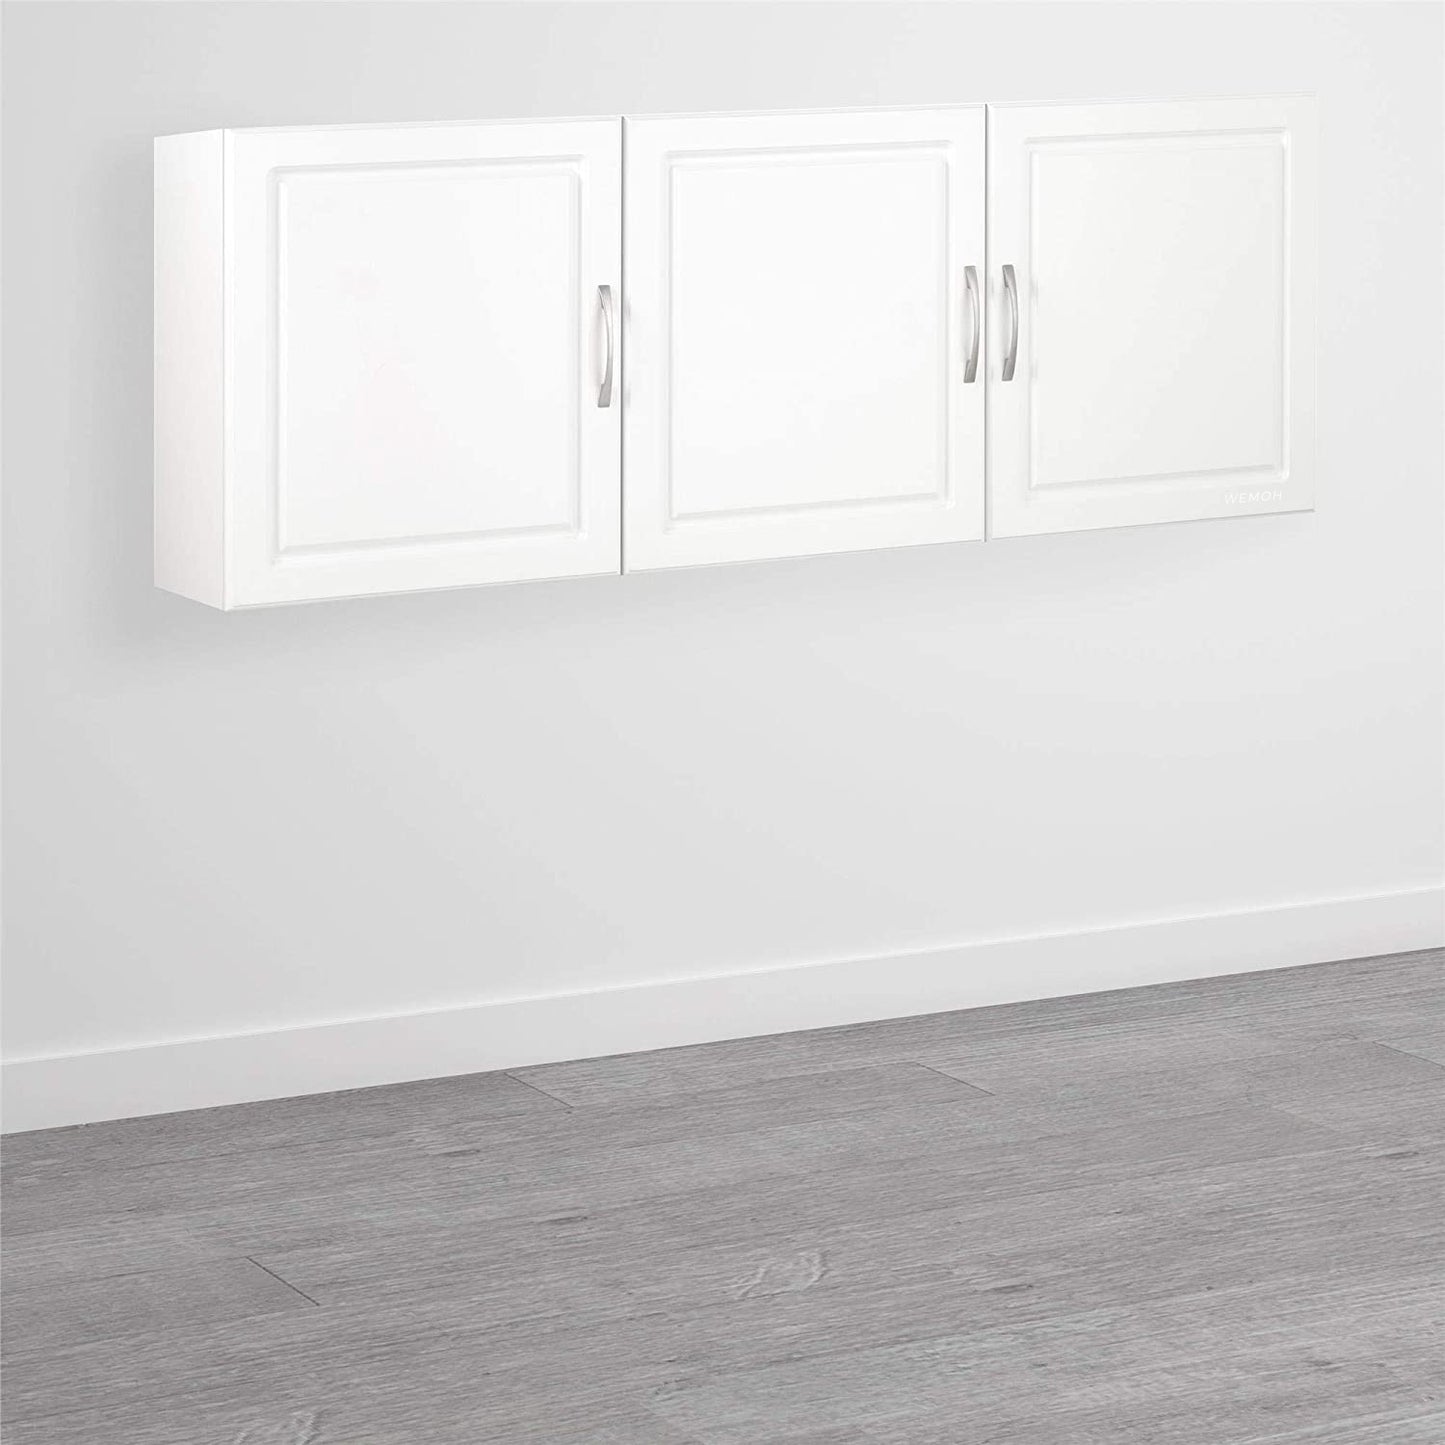 Wemoh  Kendall 54" Wall Cabinet - White